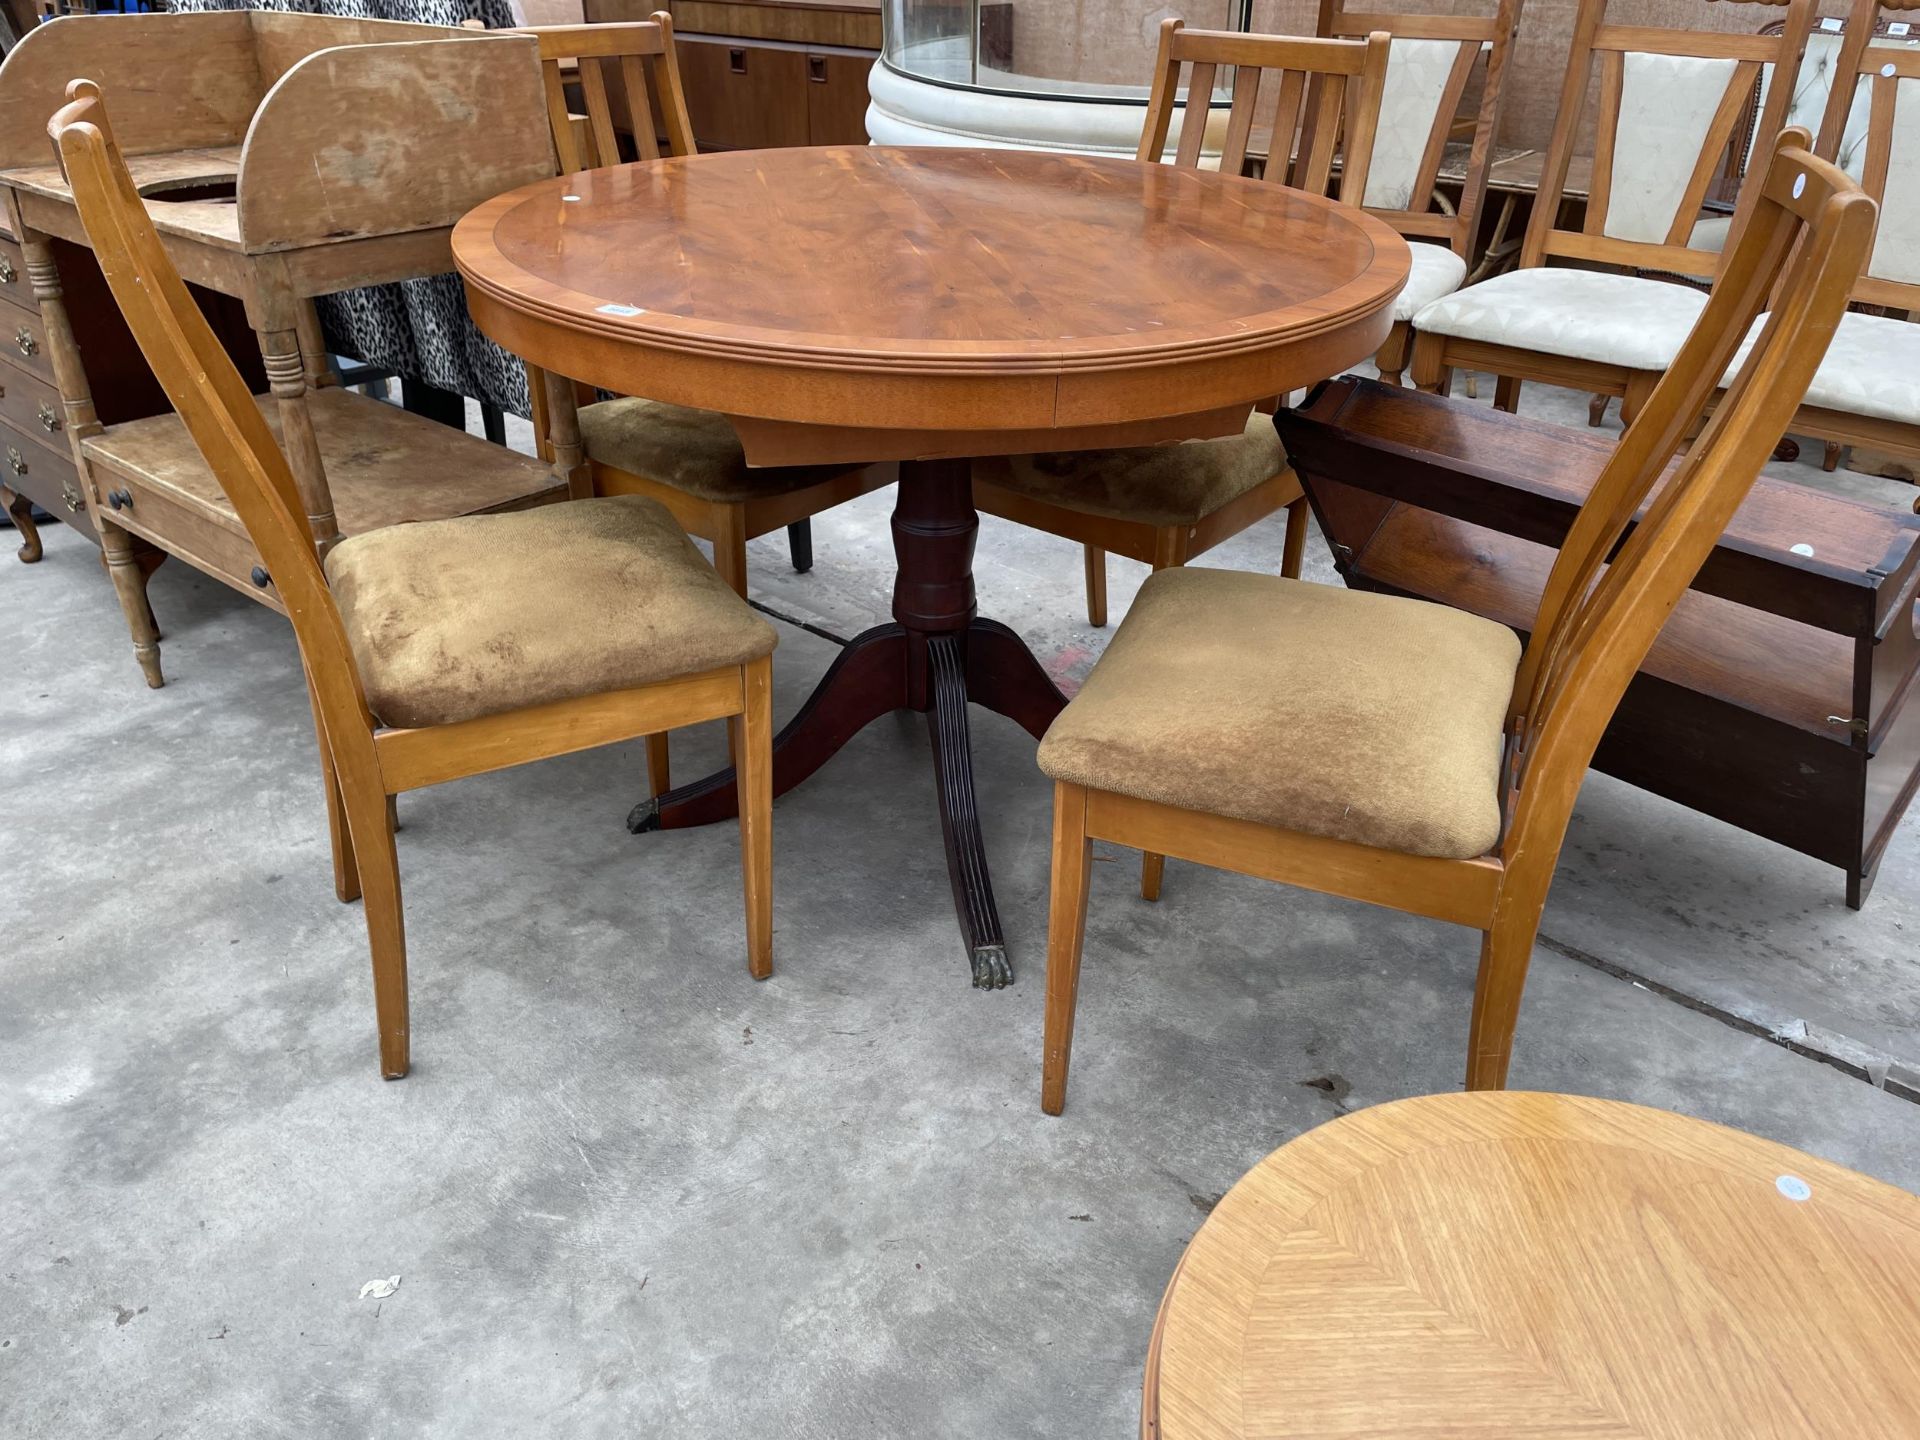 A YEW WOOD PEDESTAL DINING TABLE AND FOUR CHAIRS - Image 3 of 5